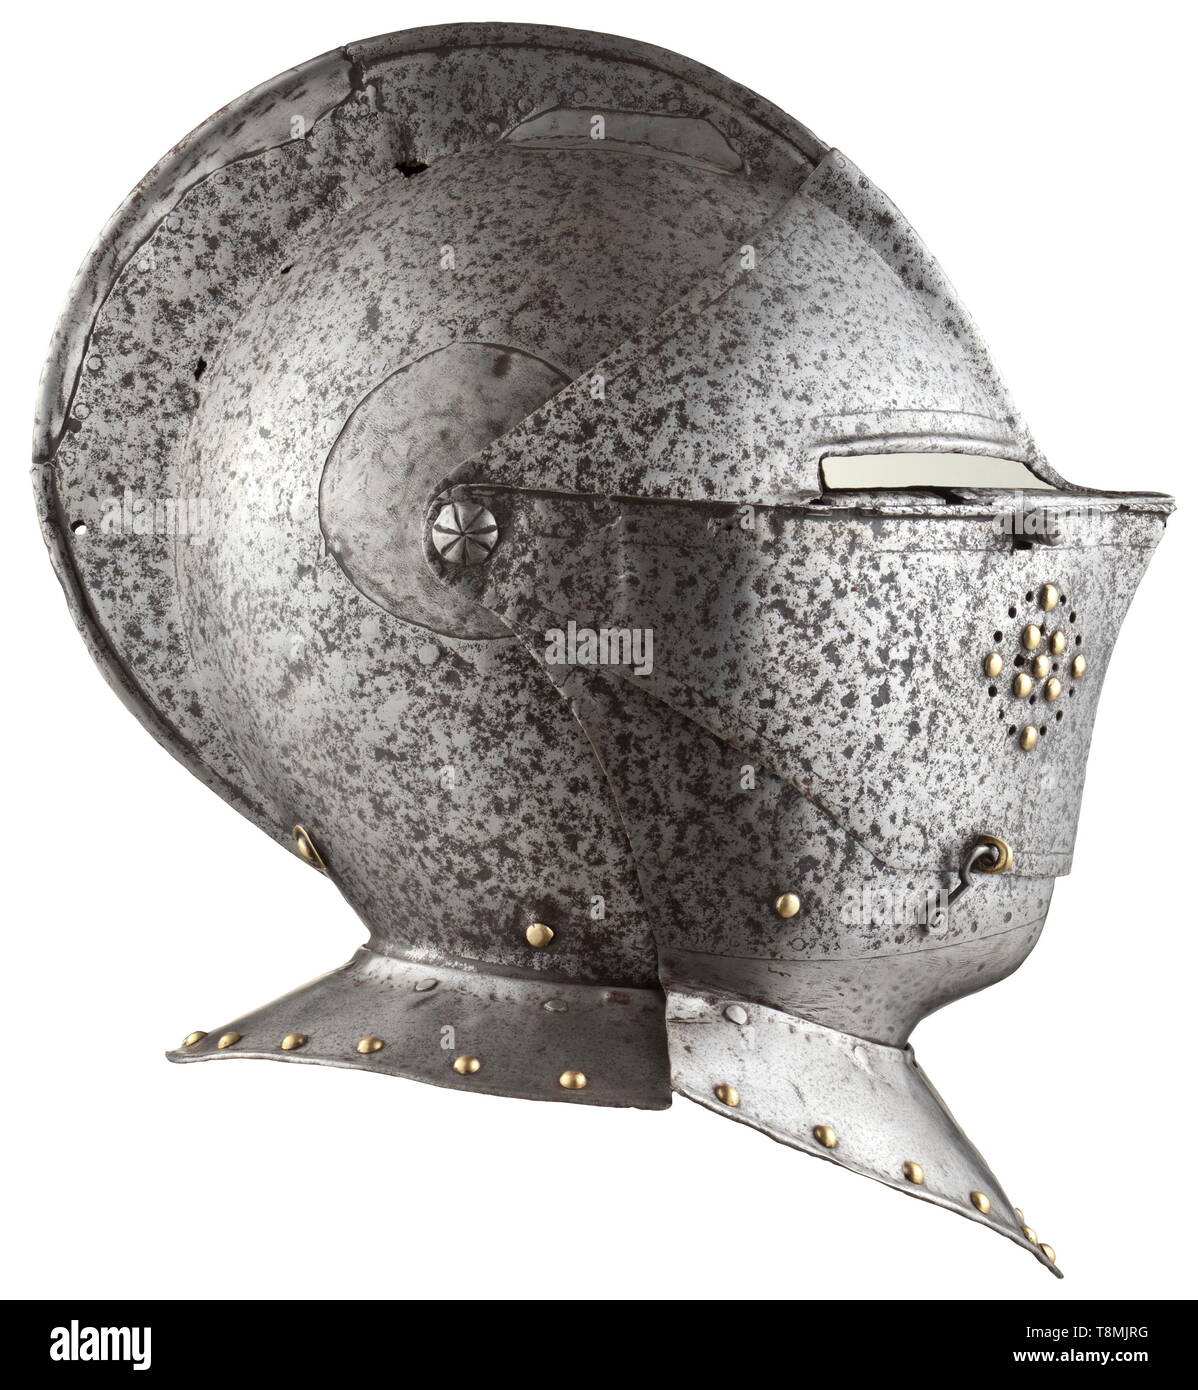 A cuirassier helmet, Flemish/French, circa 1600 Two-piece skull with tall, turned comb. Two-piece pivoted visor with lateral hook-and-eye closure and separated vision slits. The obverse with circular ventilation holes decorated with brass rivets. Pivoted bevor with riveted collar. Several repairs at the comb and visor hinge on the right, both pieces of the gorget added. Height 32 cm. historic, historical, defensive arms, weapons, arms, weapon, arm, fighting device, object, objects, stills, clipping, clippings, cut out, cut-out, cut-outs, utensil,, Additional-Rights-Clearance-Info-Not-Available Stock Photo